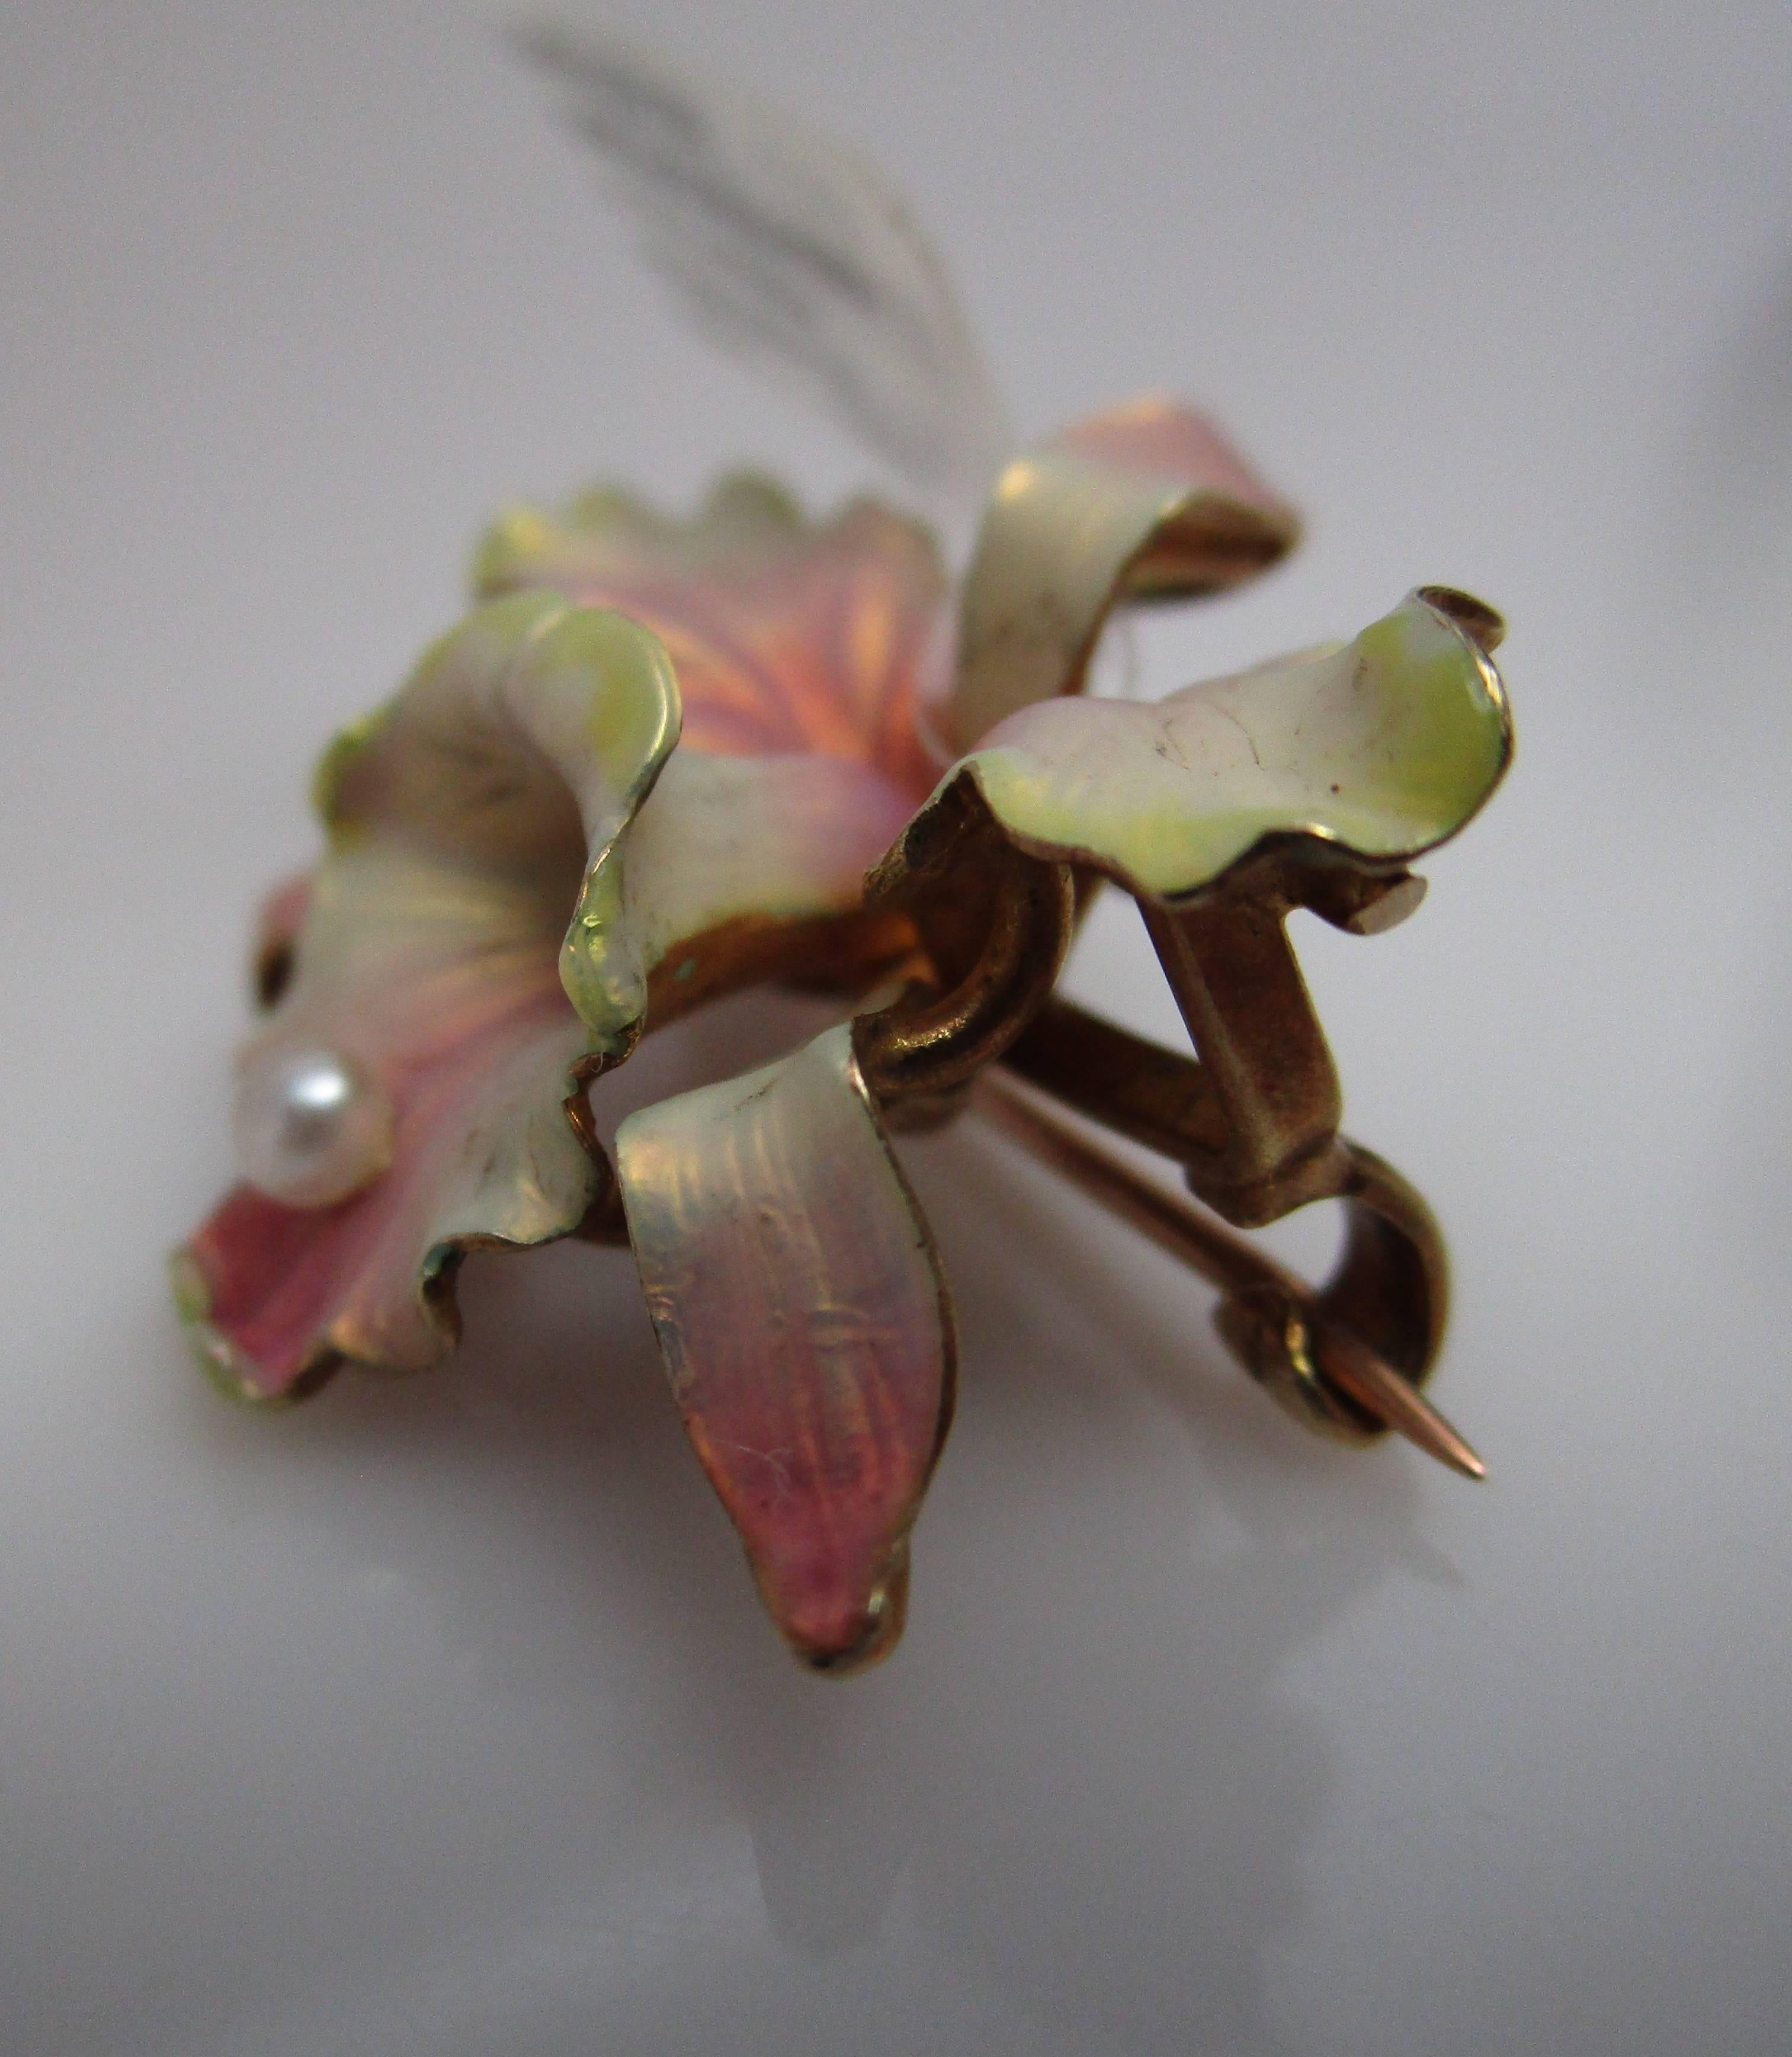 With a delicate flourish, this orchid brooch fades from translucent magenta to olive on the delicate, velvety petals. The lines are so seamless that it looks as though this could be a real orchid. This brooch dates back to around 1900 and has what